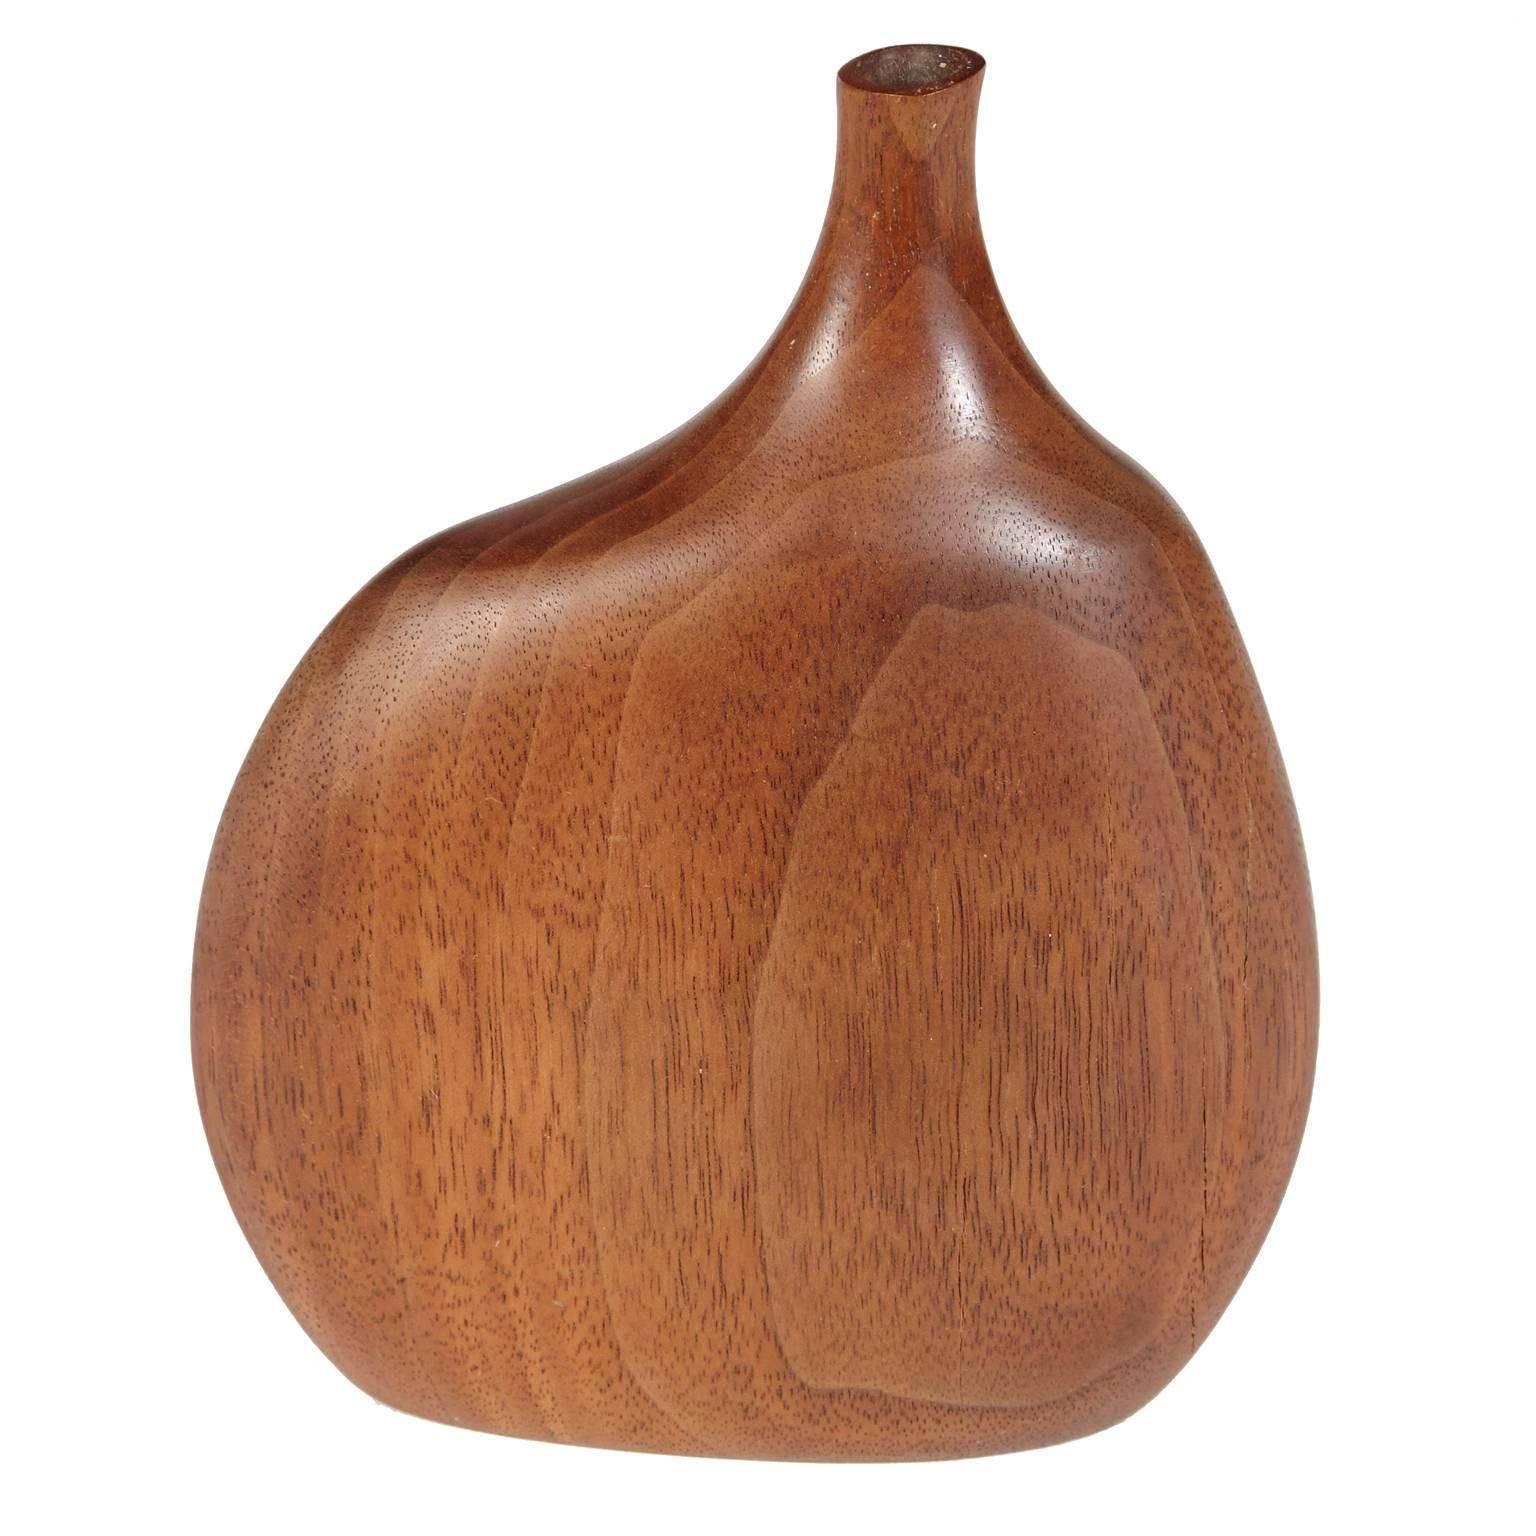 Beautiful Asymmetrical Doug Ayers Carved Wood Vase For Sale